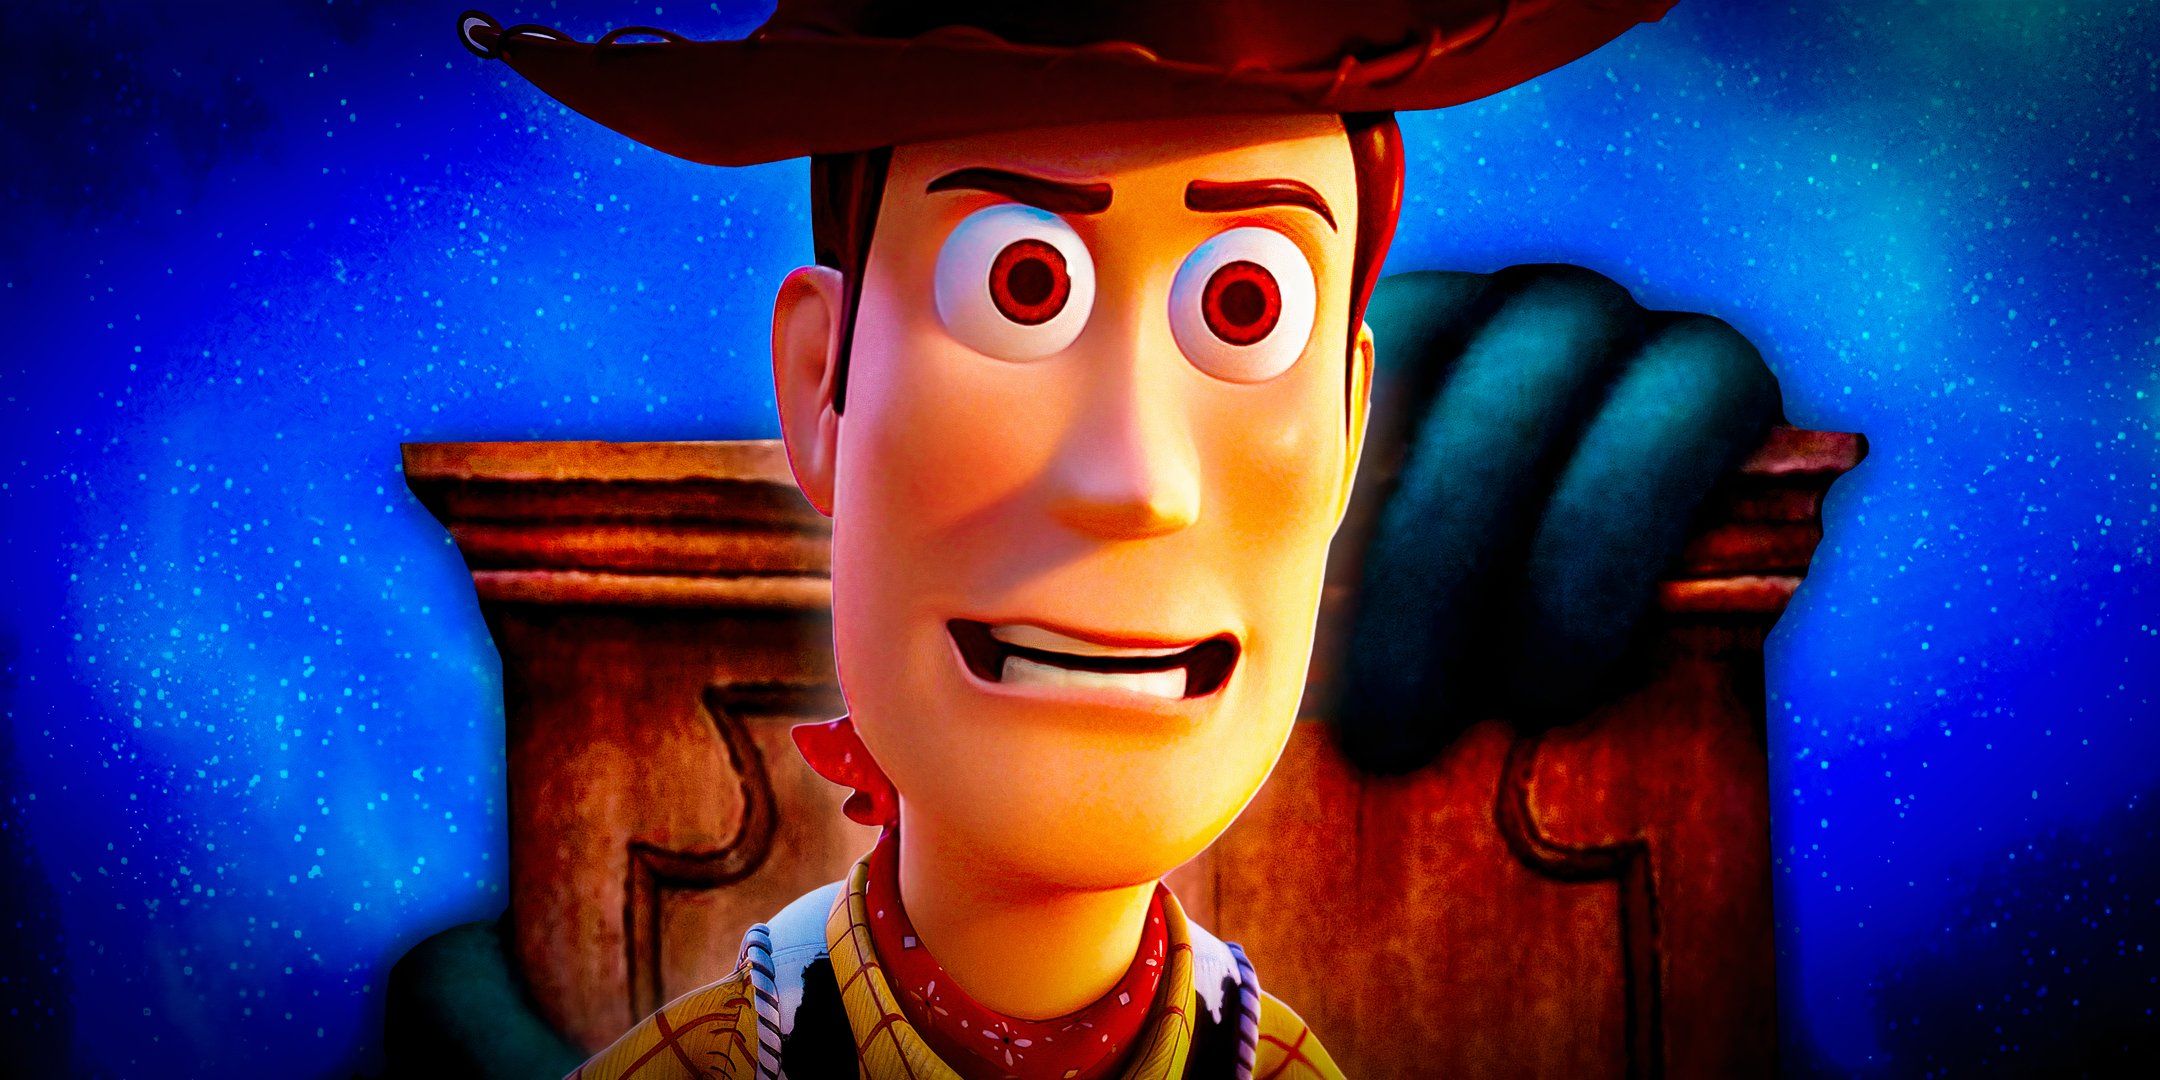 Woody in Toy Story 3.